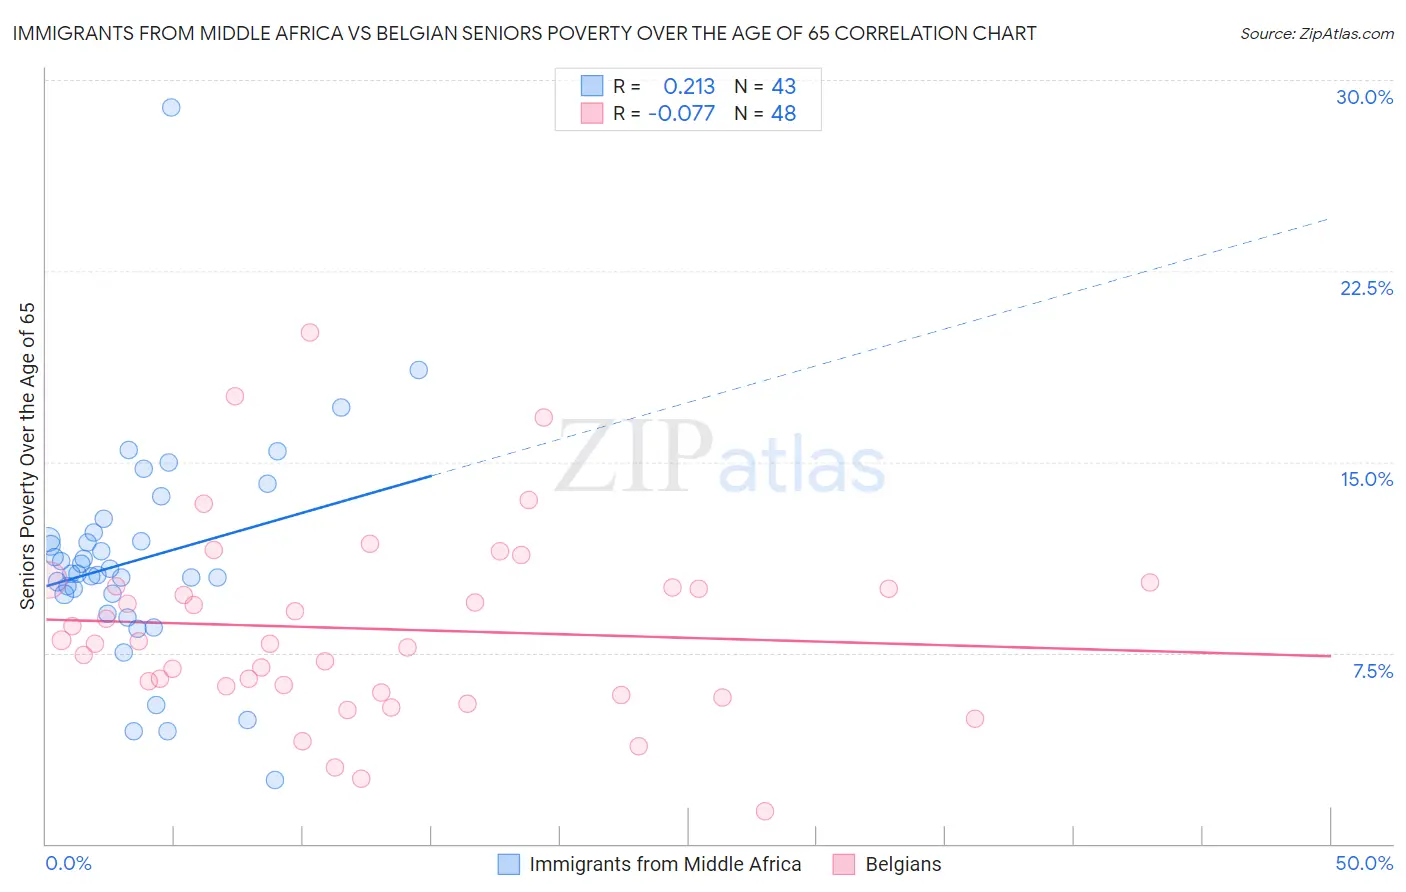 Immigrants from Middle Africa vs Belgian Seniors Poverty Over the Age of 65